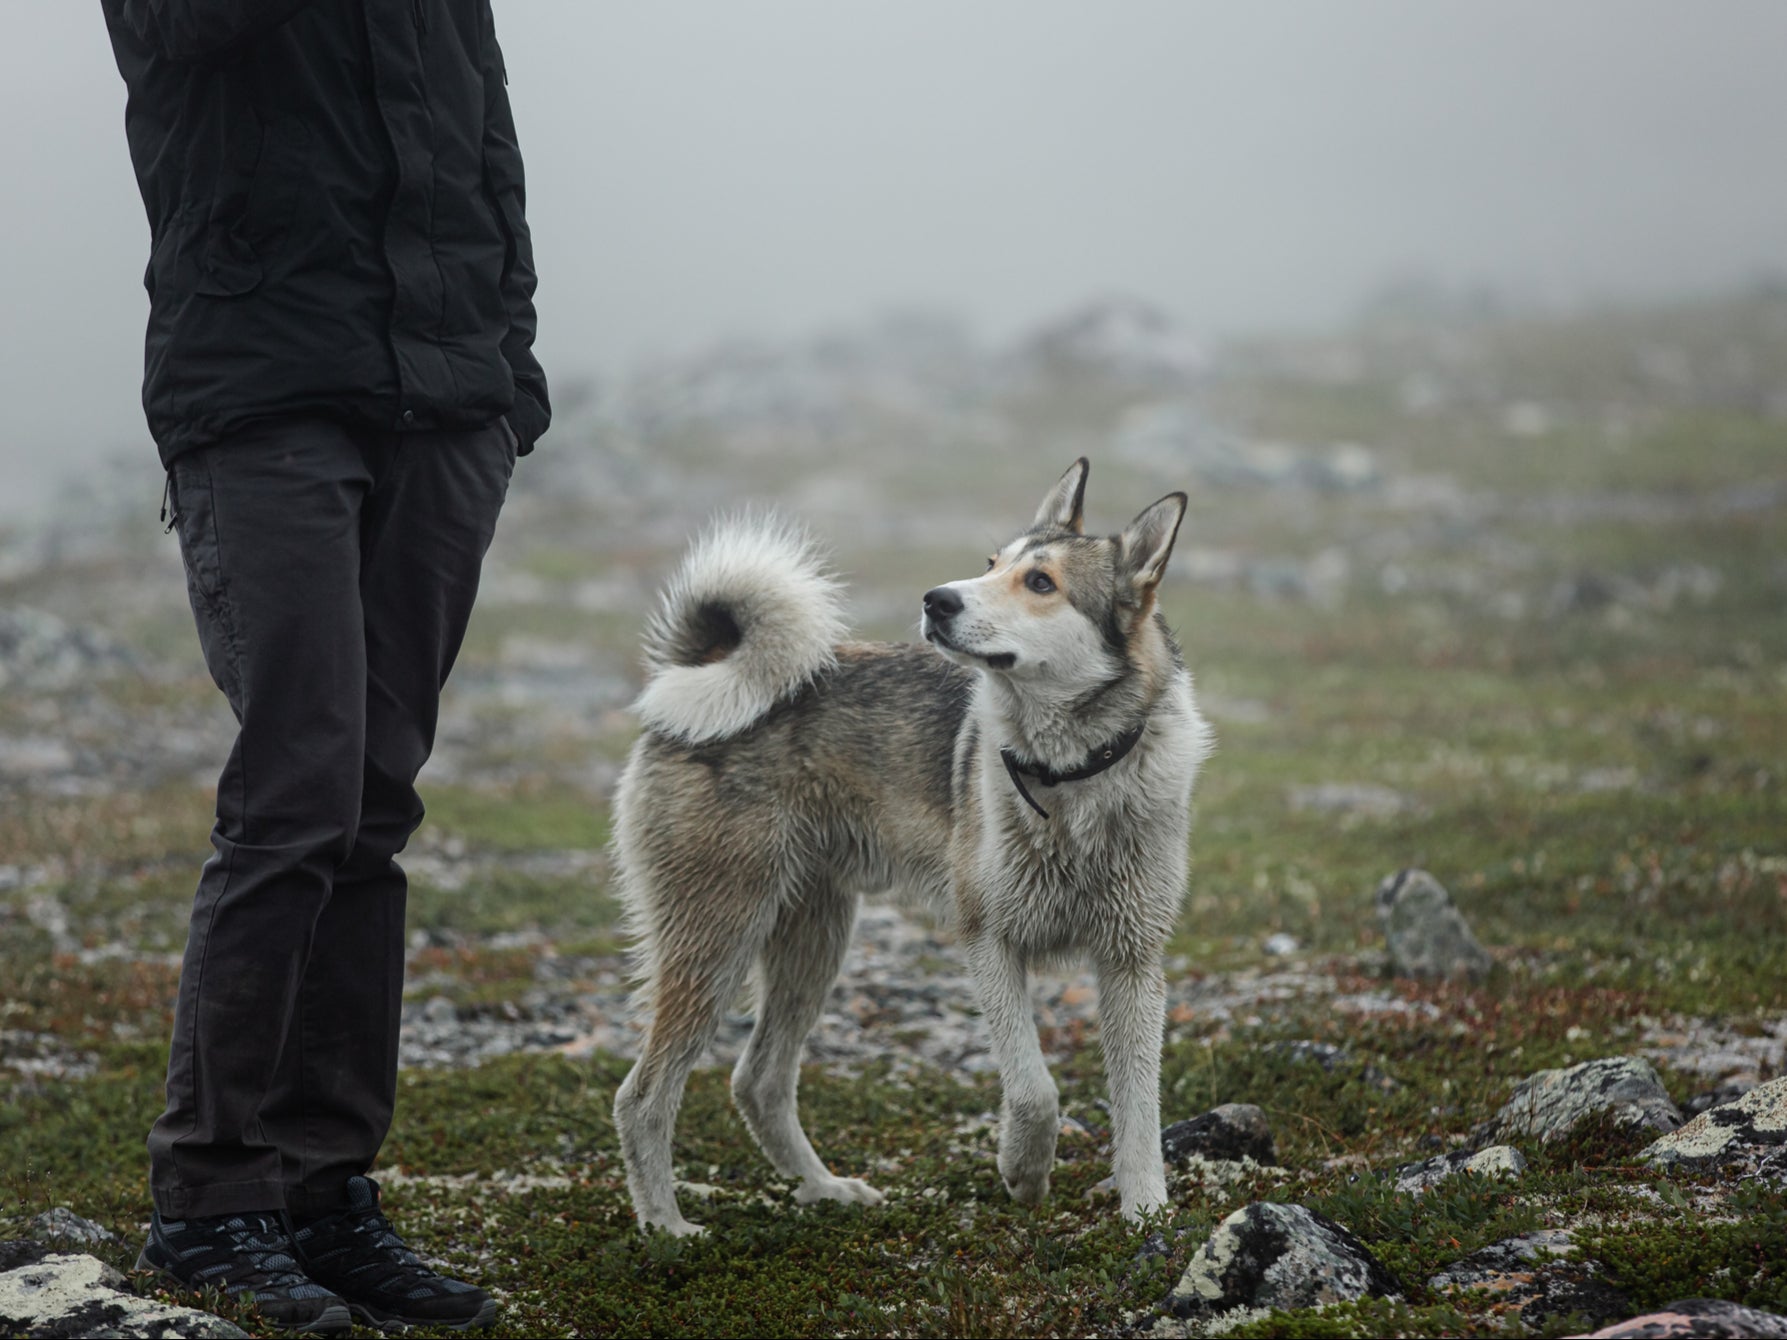 The precise origin of man’s relationship with dogs ‘remains shrouded in mystery’